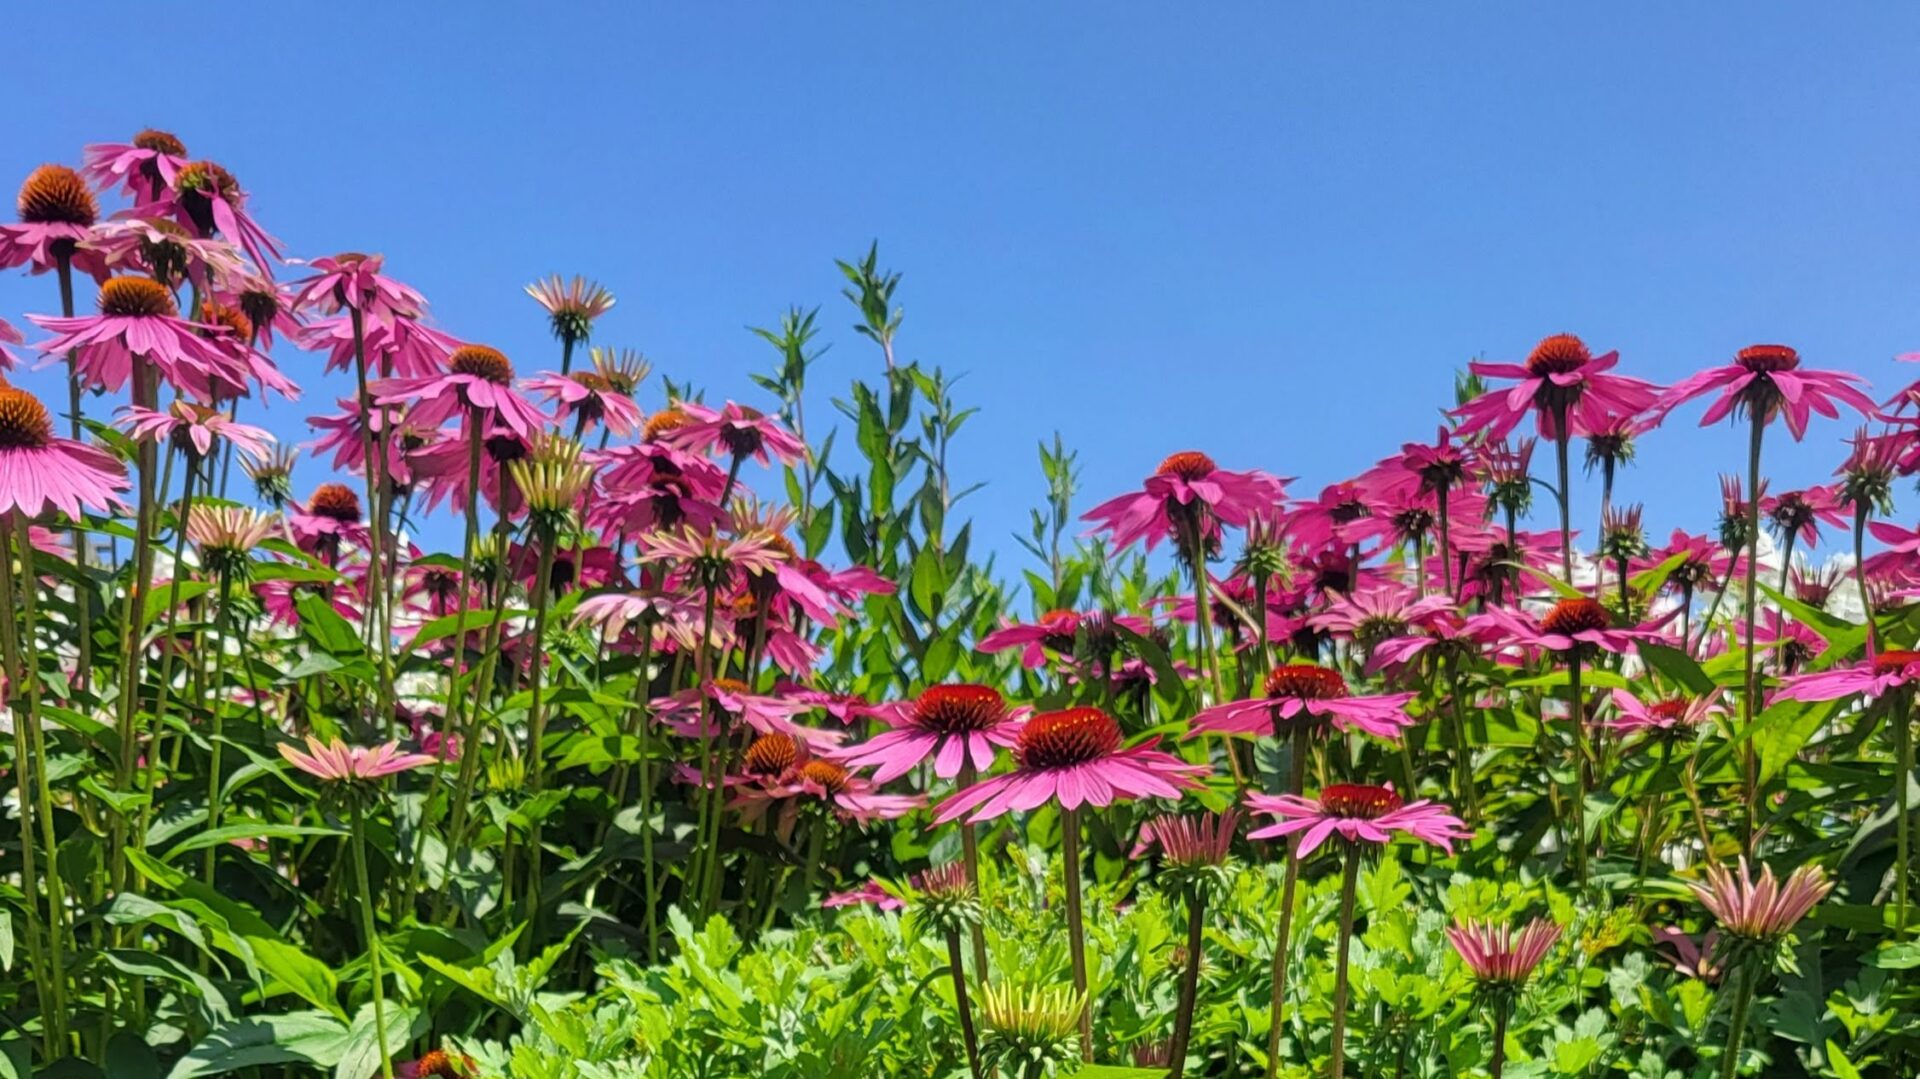 A vibrant garden with pink coneflowers (Echinacea) blooming under a clear blue sky, showcasing their prominent central cones and slender petals.